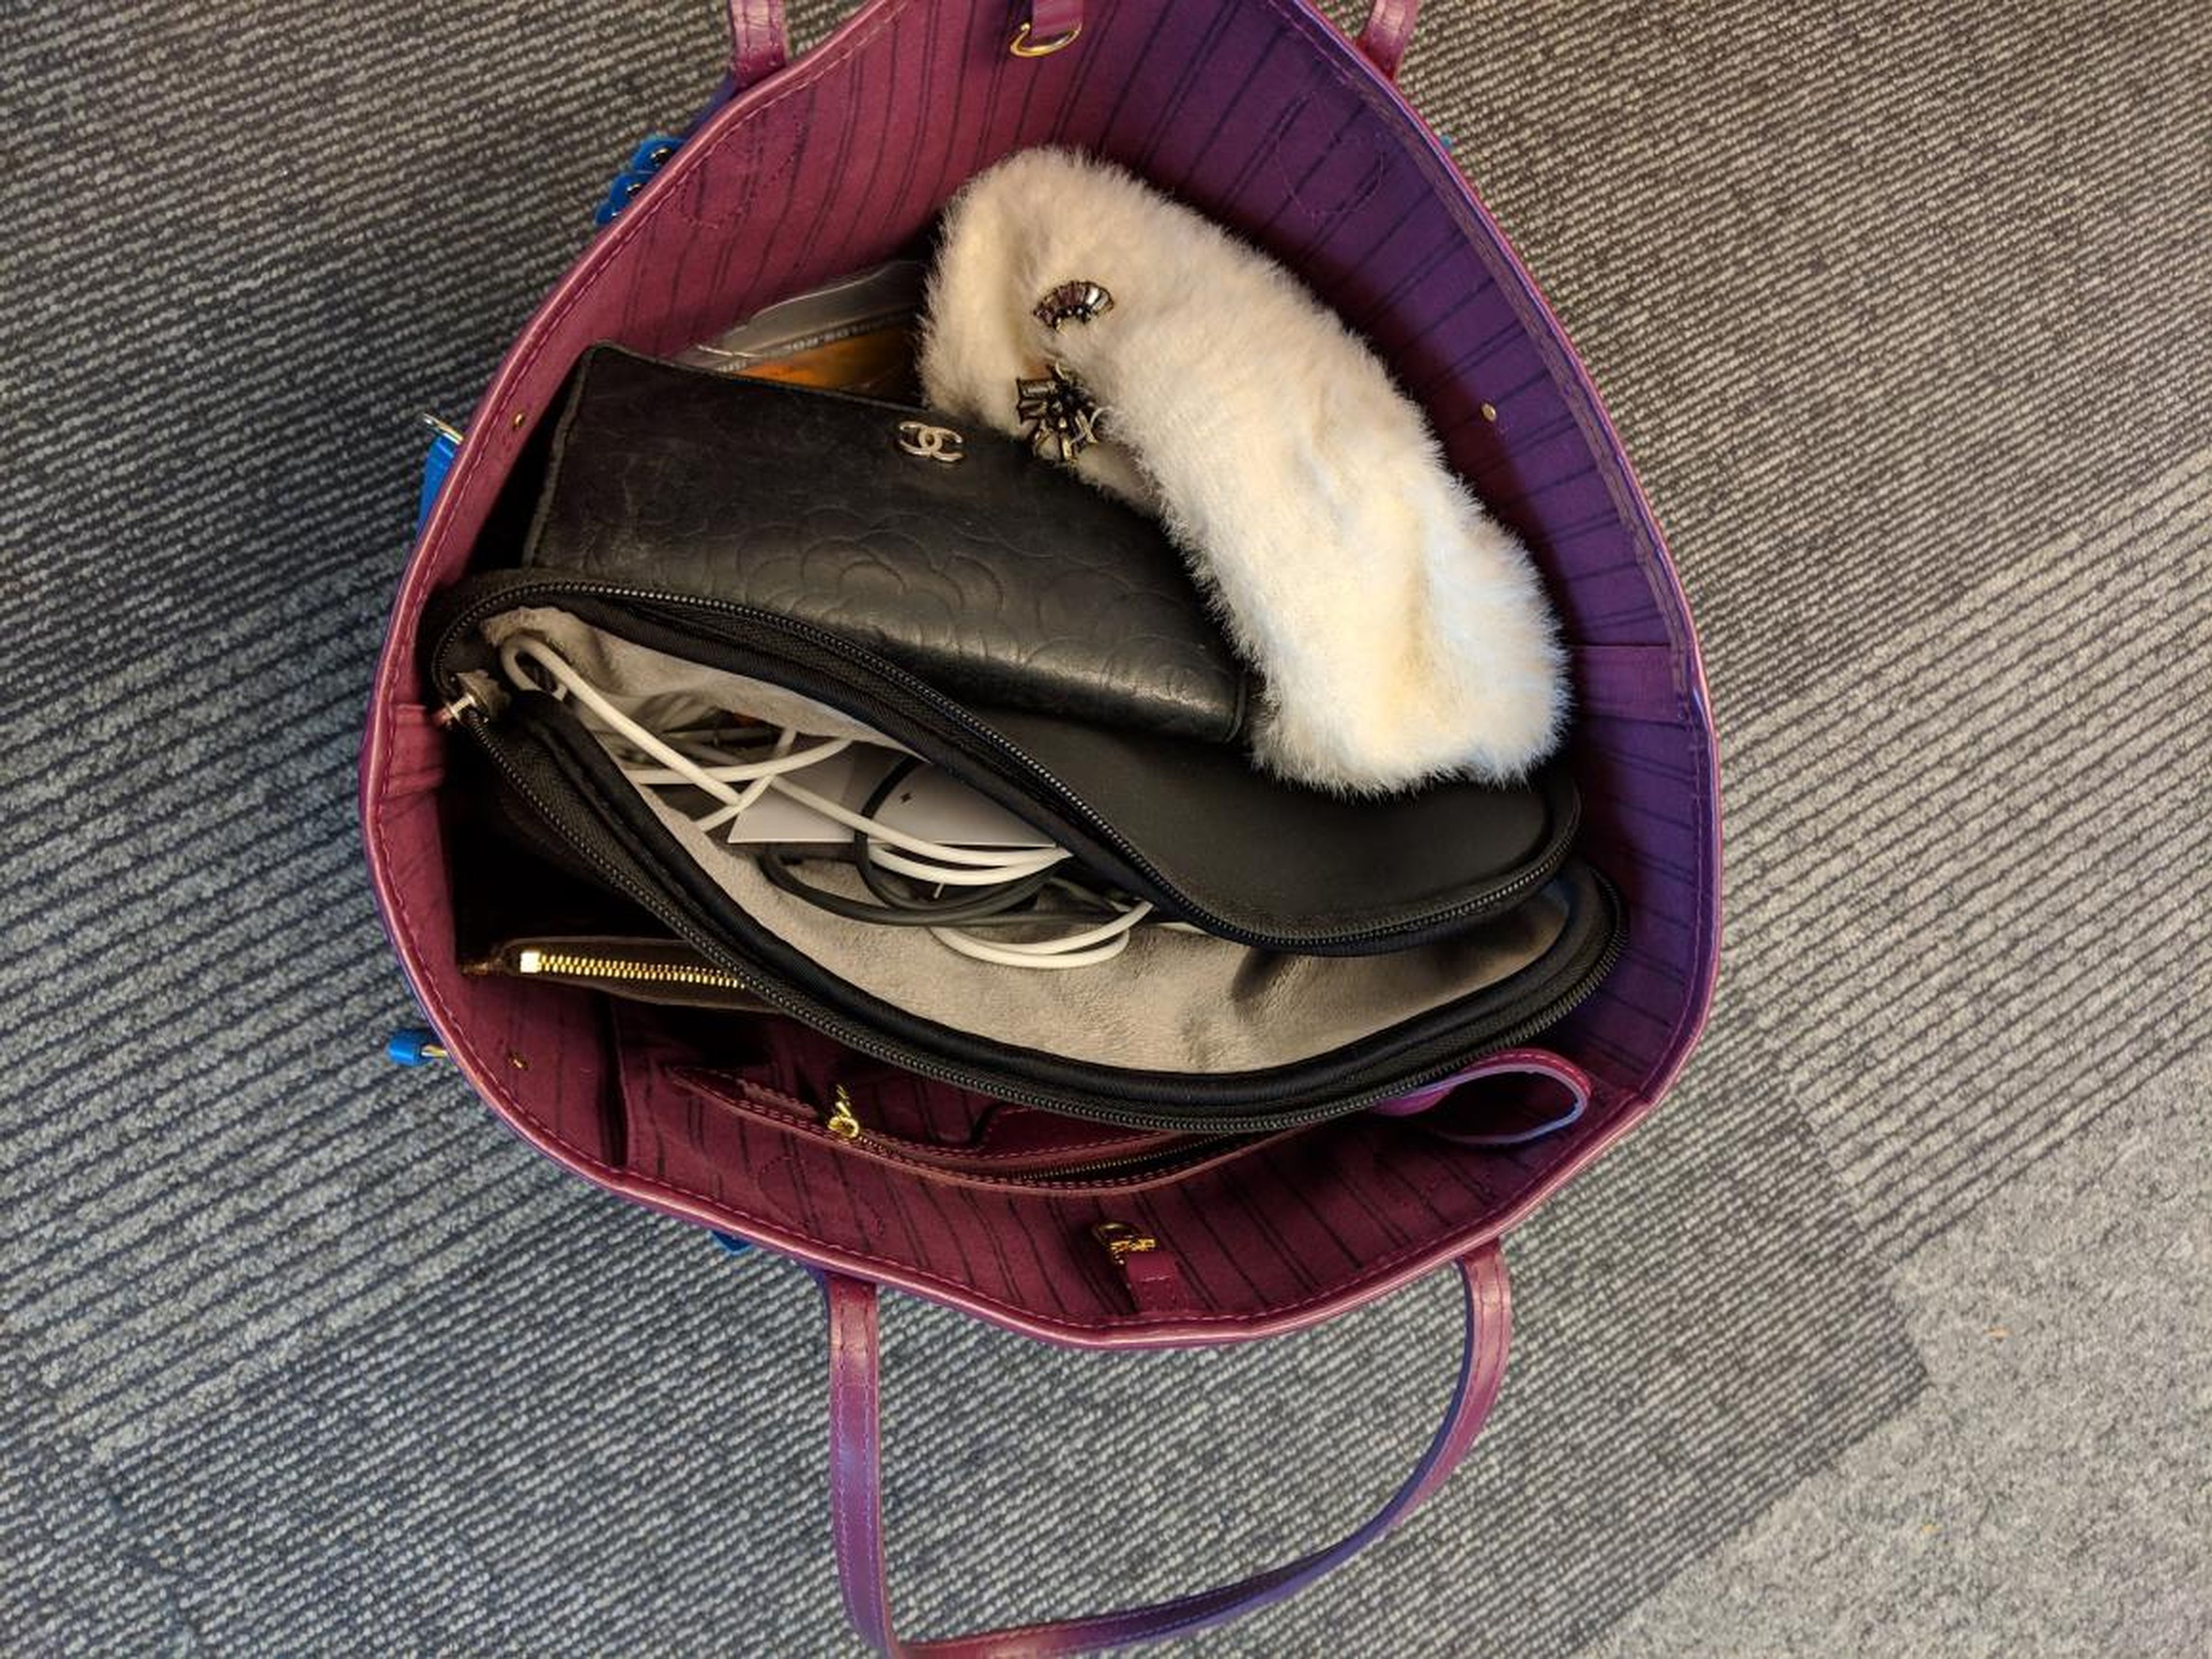 Rincon's work bag usually contains her computer, wallet, phone, a hair tie, and some lipstick. "I also throw in a fuzzy tuque (I am Canadian, after all) for when the weather gets cooler here in Mountain View," Rincon said.